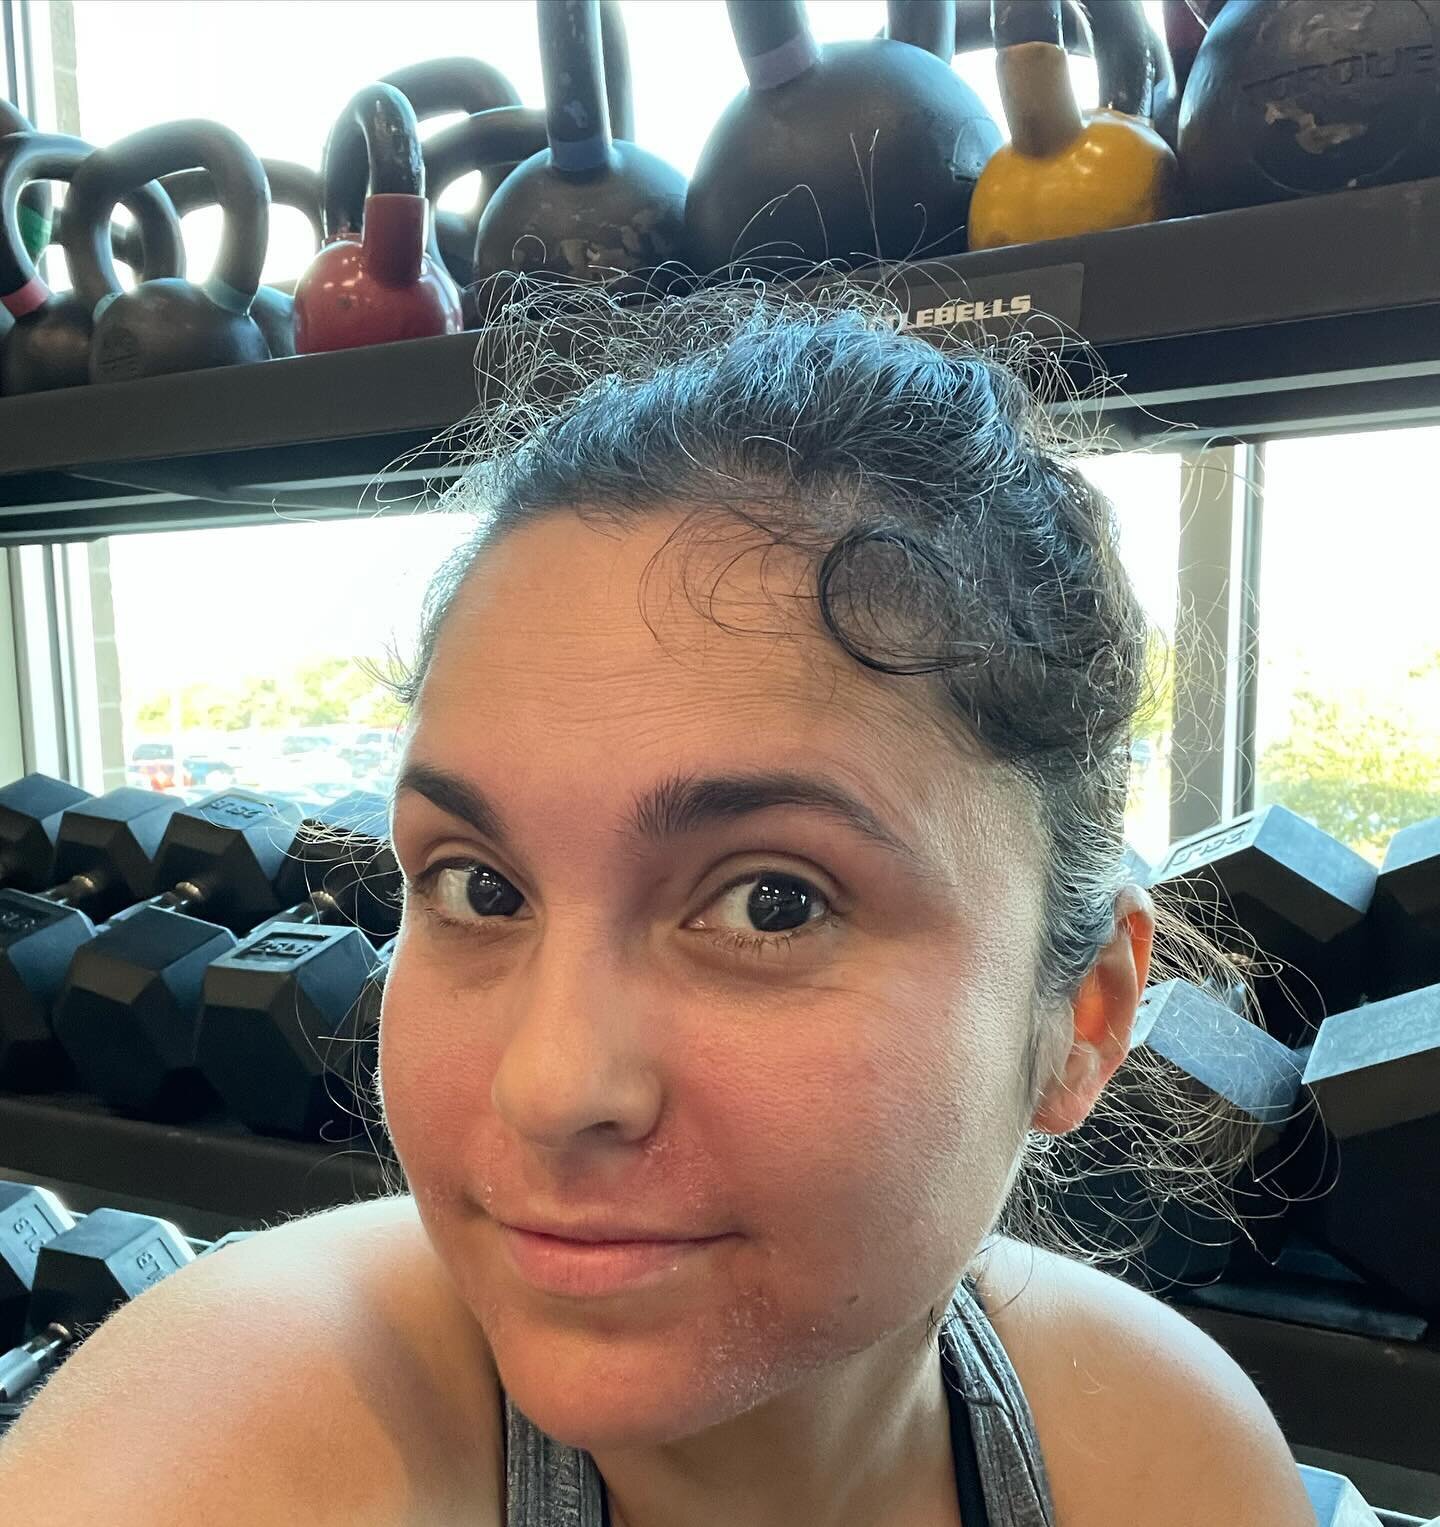 The eczema gods tried to stop my workout this morning with burning, dry skin and an asthma episode. Nah; we got this! 💪🏼🏋🏻&zwj;♀️ #skinallergies #dermatitis #itchypineapple